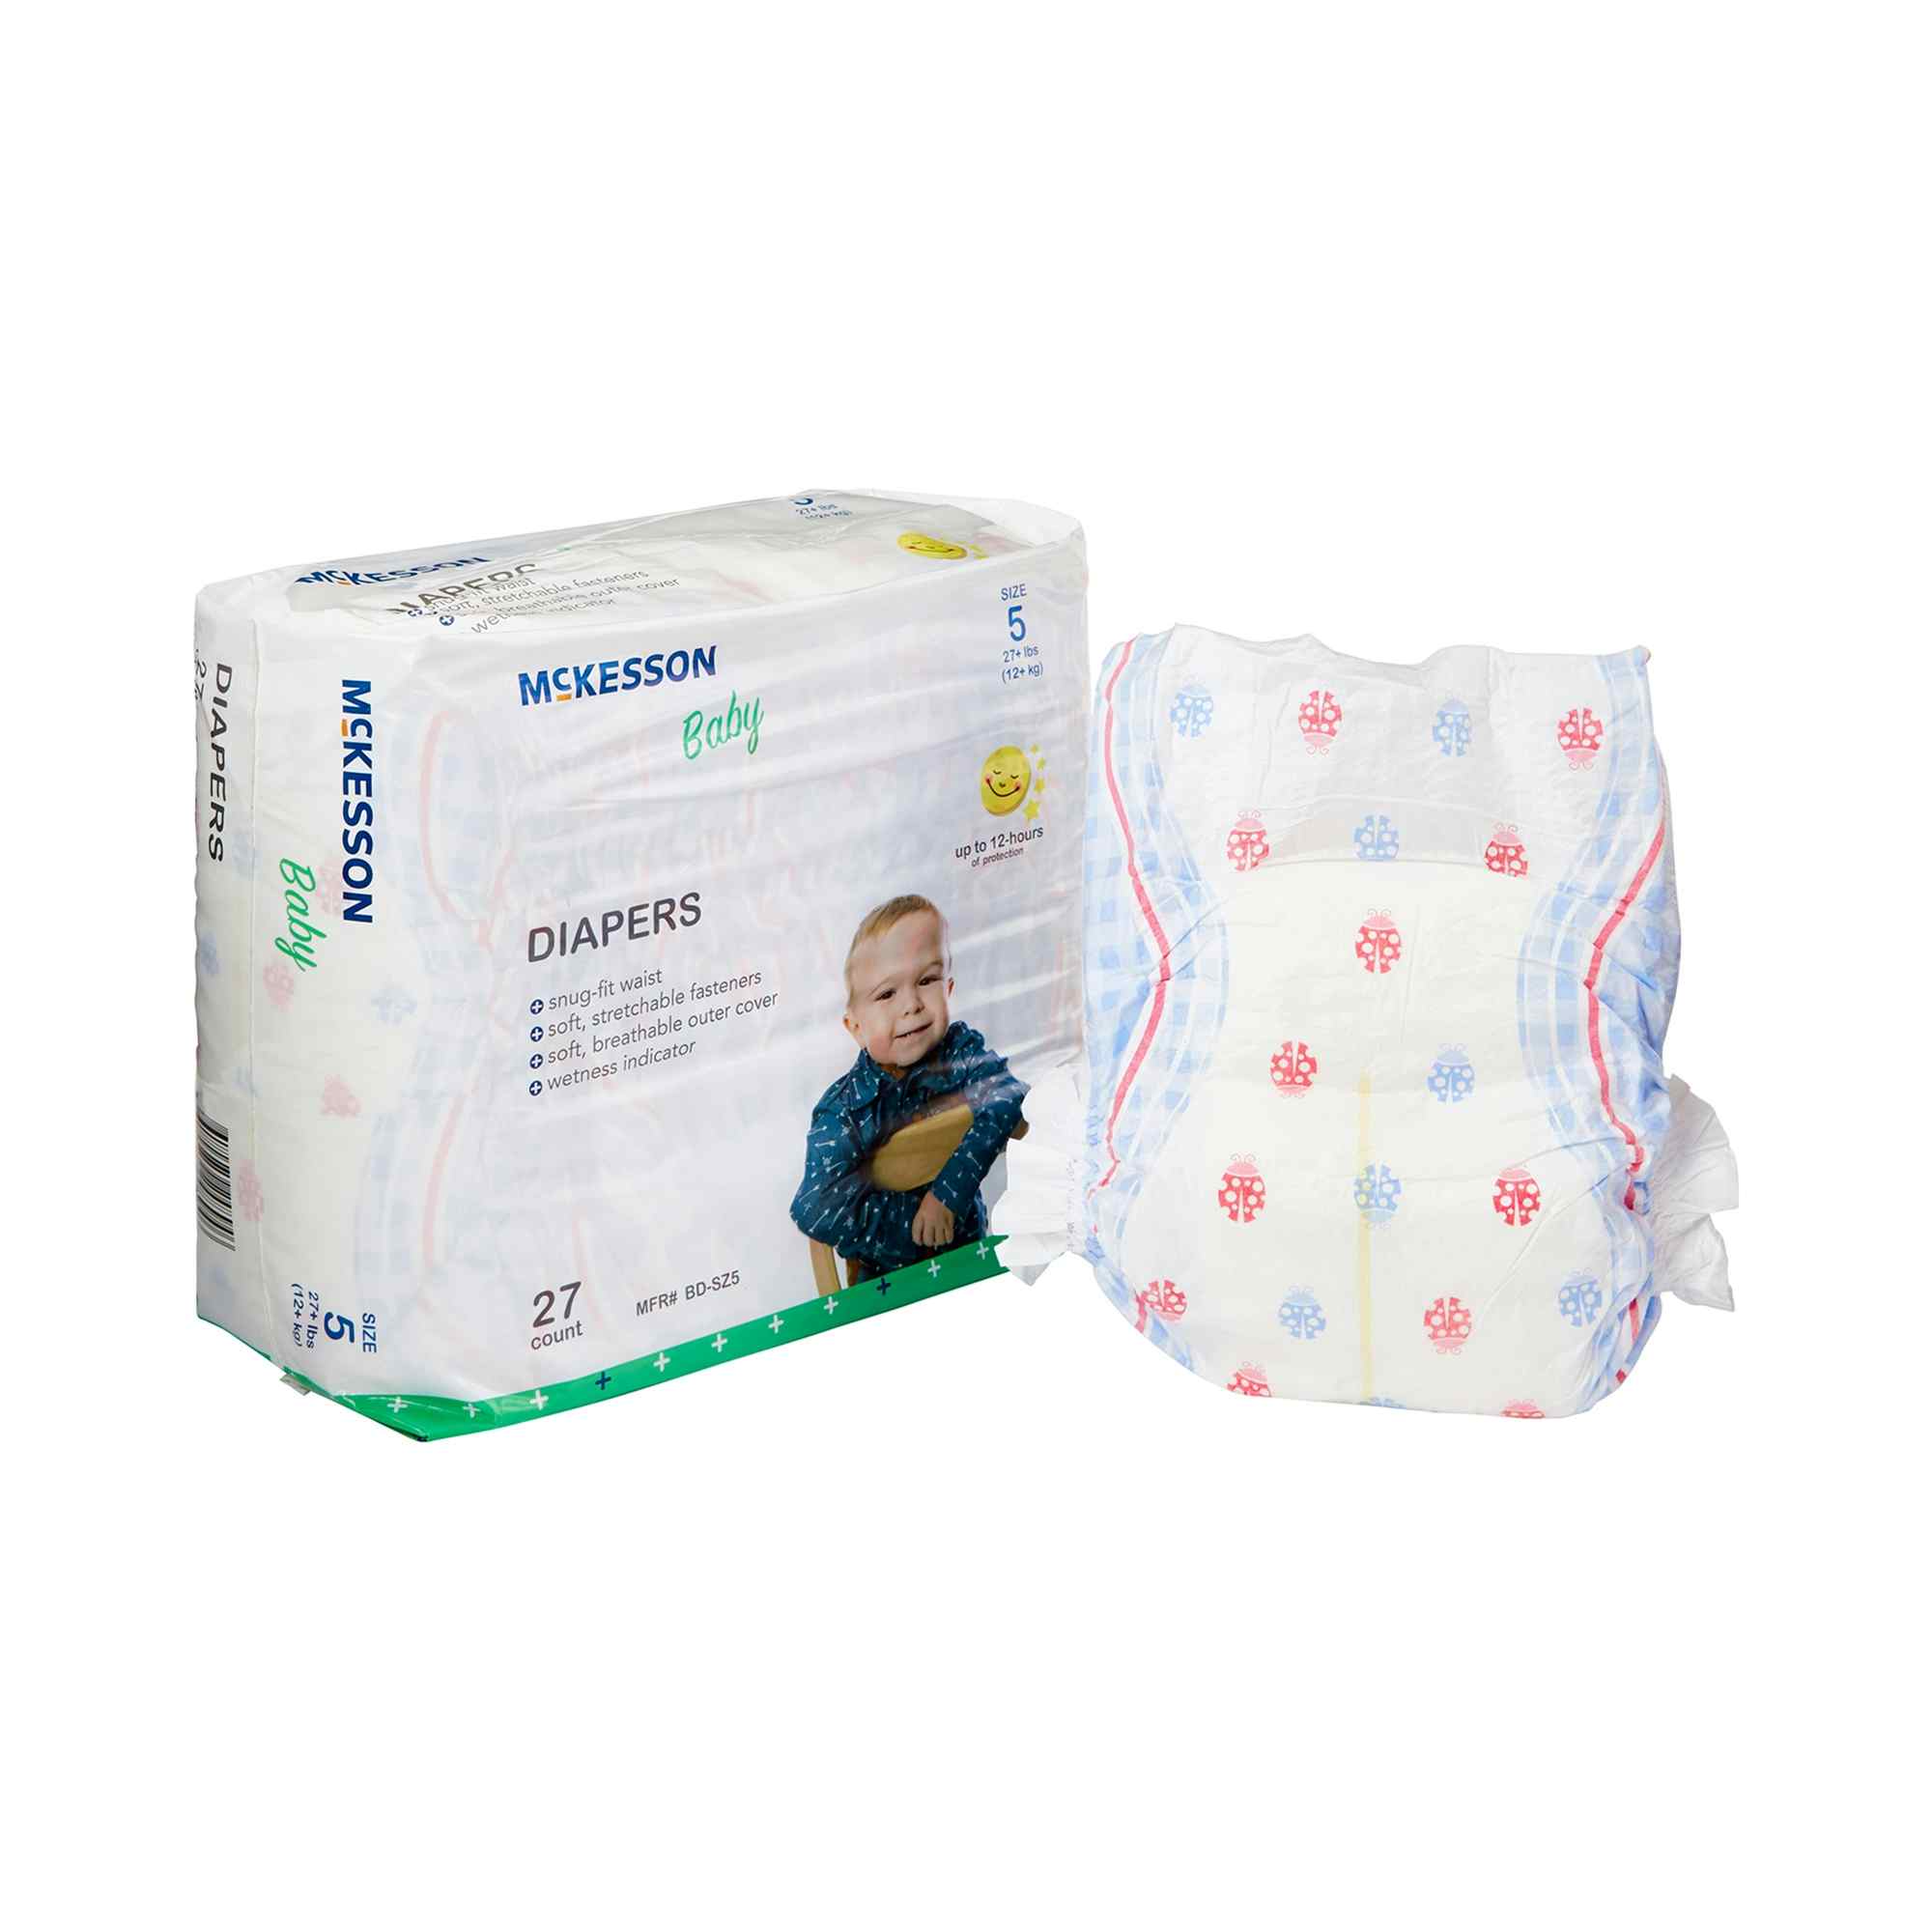 McKesson Disposable Unisex Baby Diaper with Tabs, Moderate, BD-SZ5, Size 5 Over 27 lbs - Case of 108